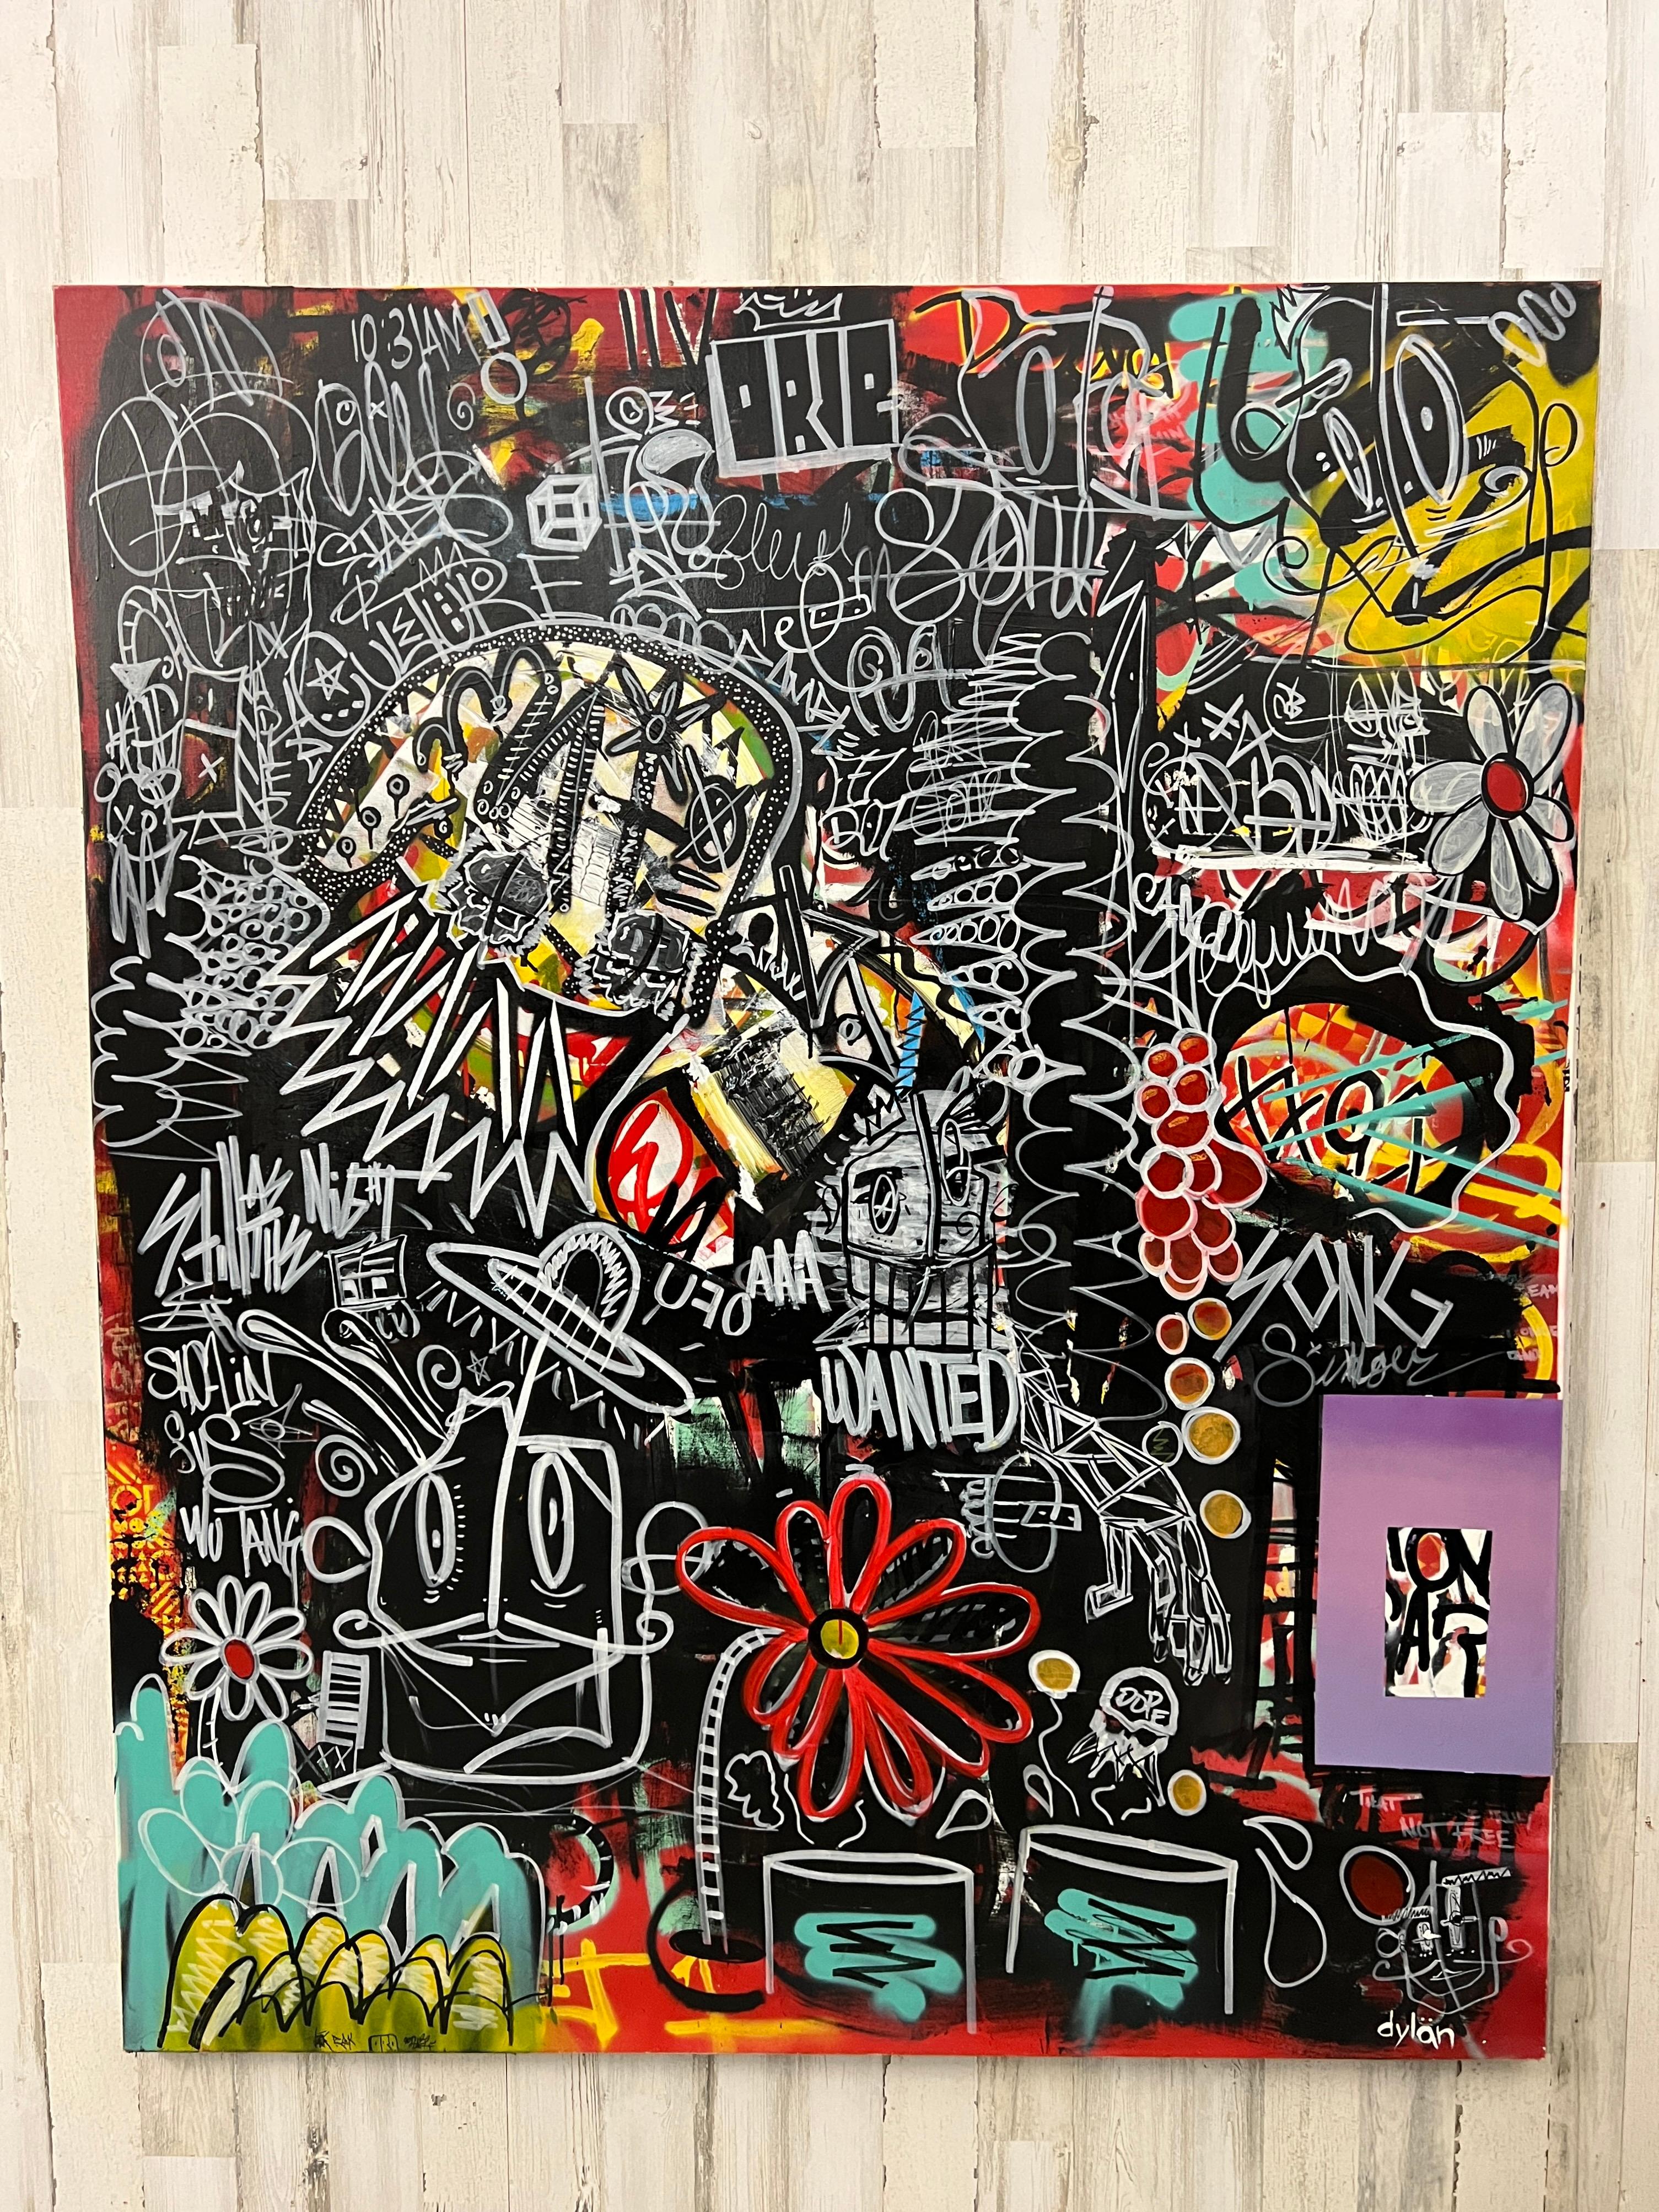 A mixed media of acrylic paint applied by hand with acrylic spray paint and alcohol ink on a wood framed canvas. Inspired by the great Graffiti artist of modern history Dylans bold 